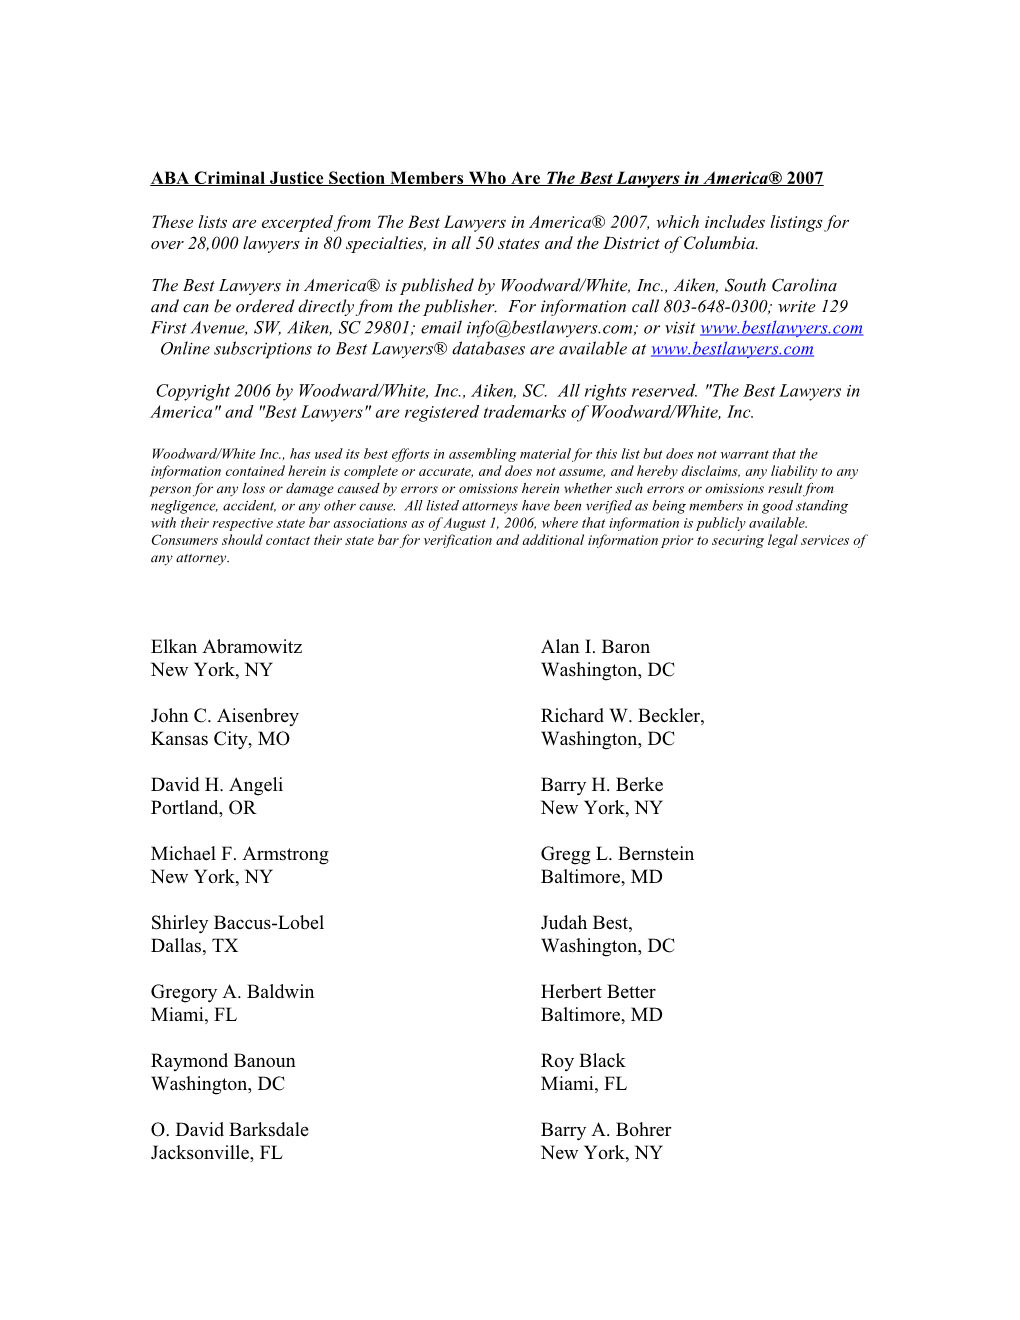 ABA Criminal Justice Section Members Who Are the Best Lawyers in America 2007